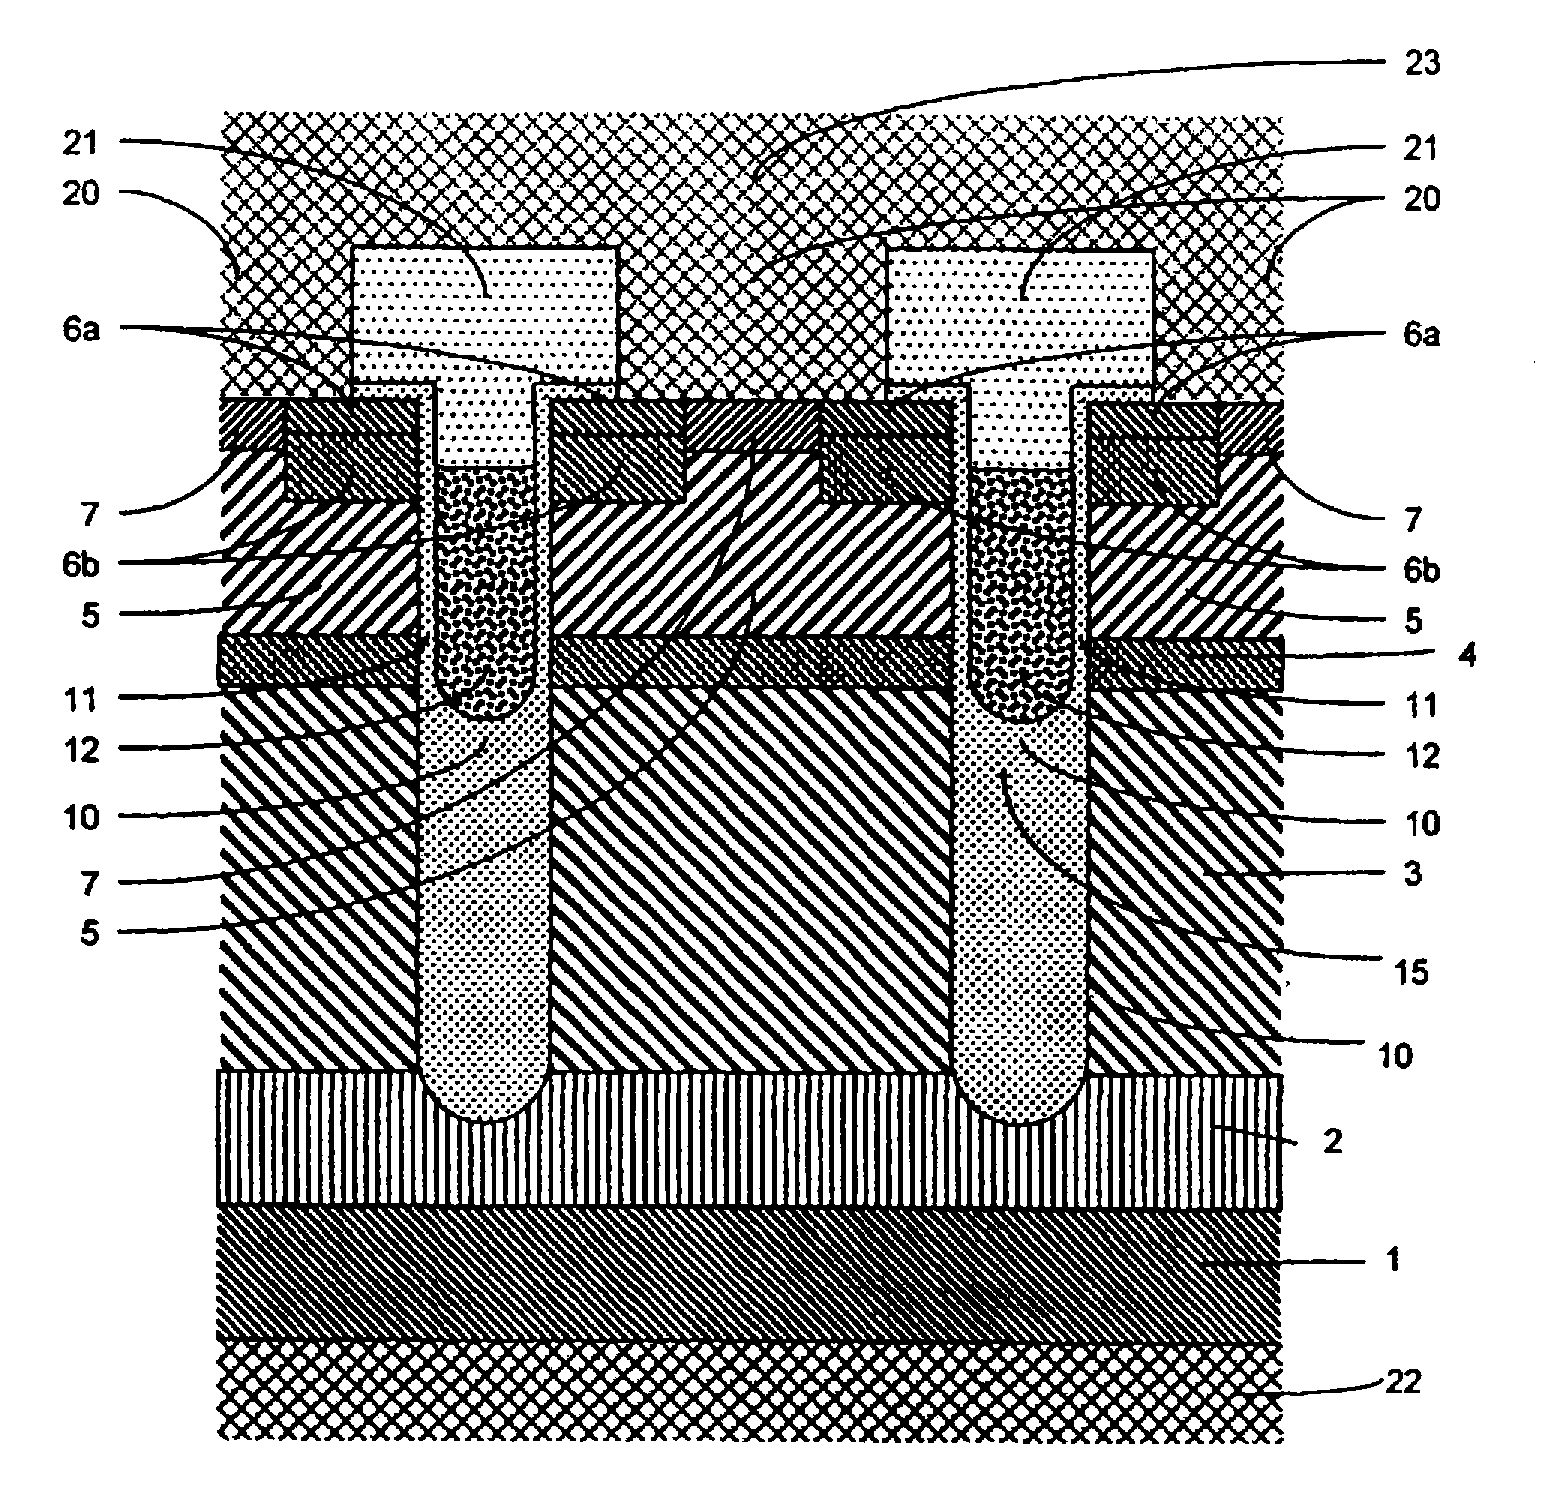 Trench gate type semiconductor device and method of producing the same